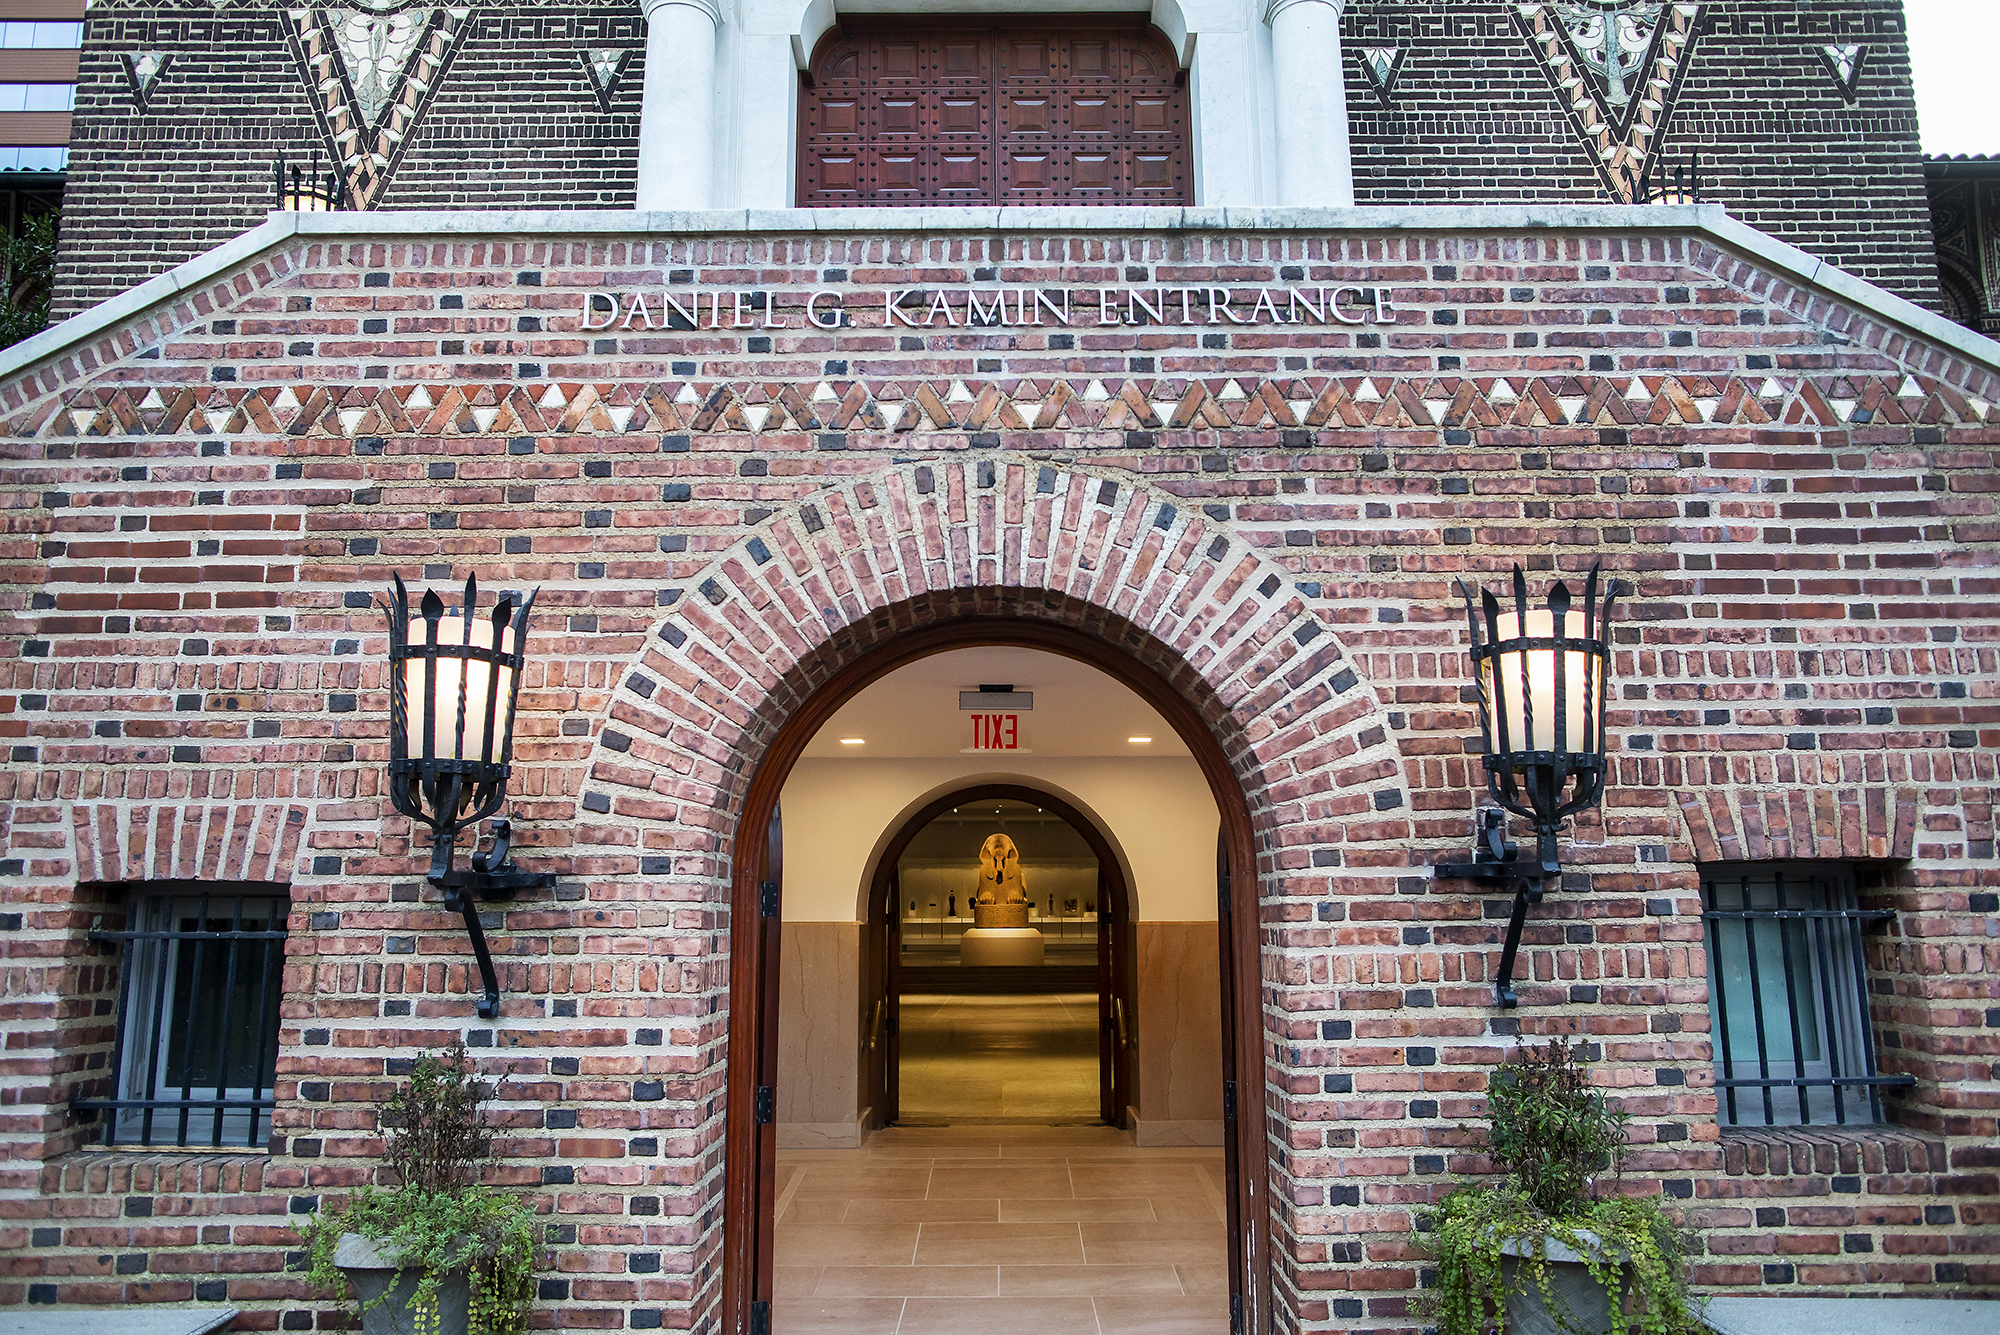 Main entrance of Penn Museum with brick wall and door open showing arched passageway with Sphinx in the doorway in the very back of the view.